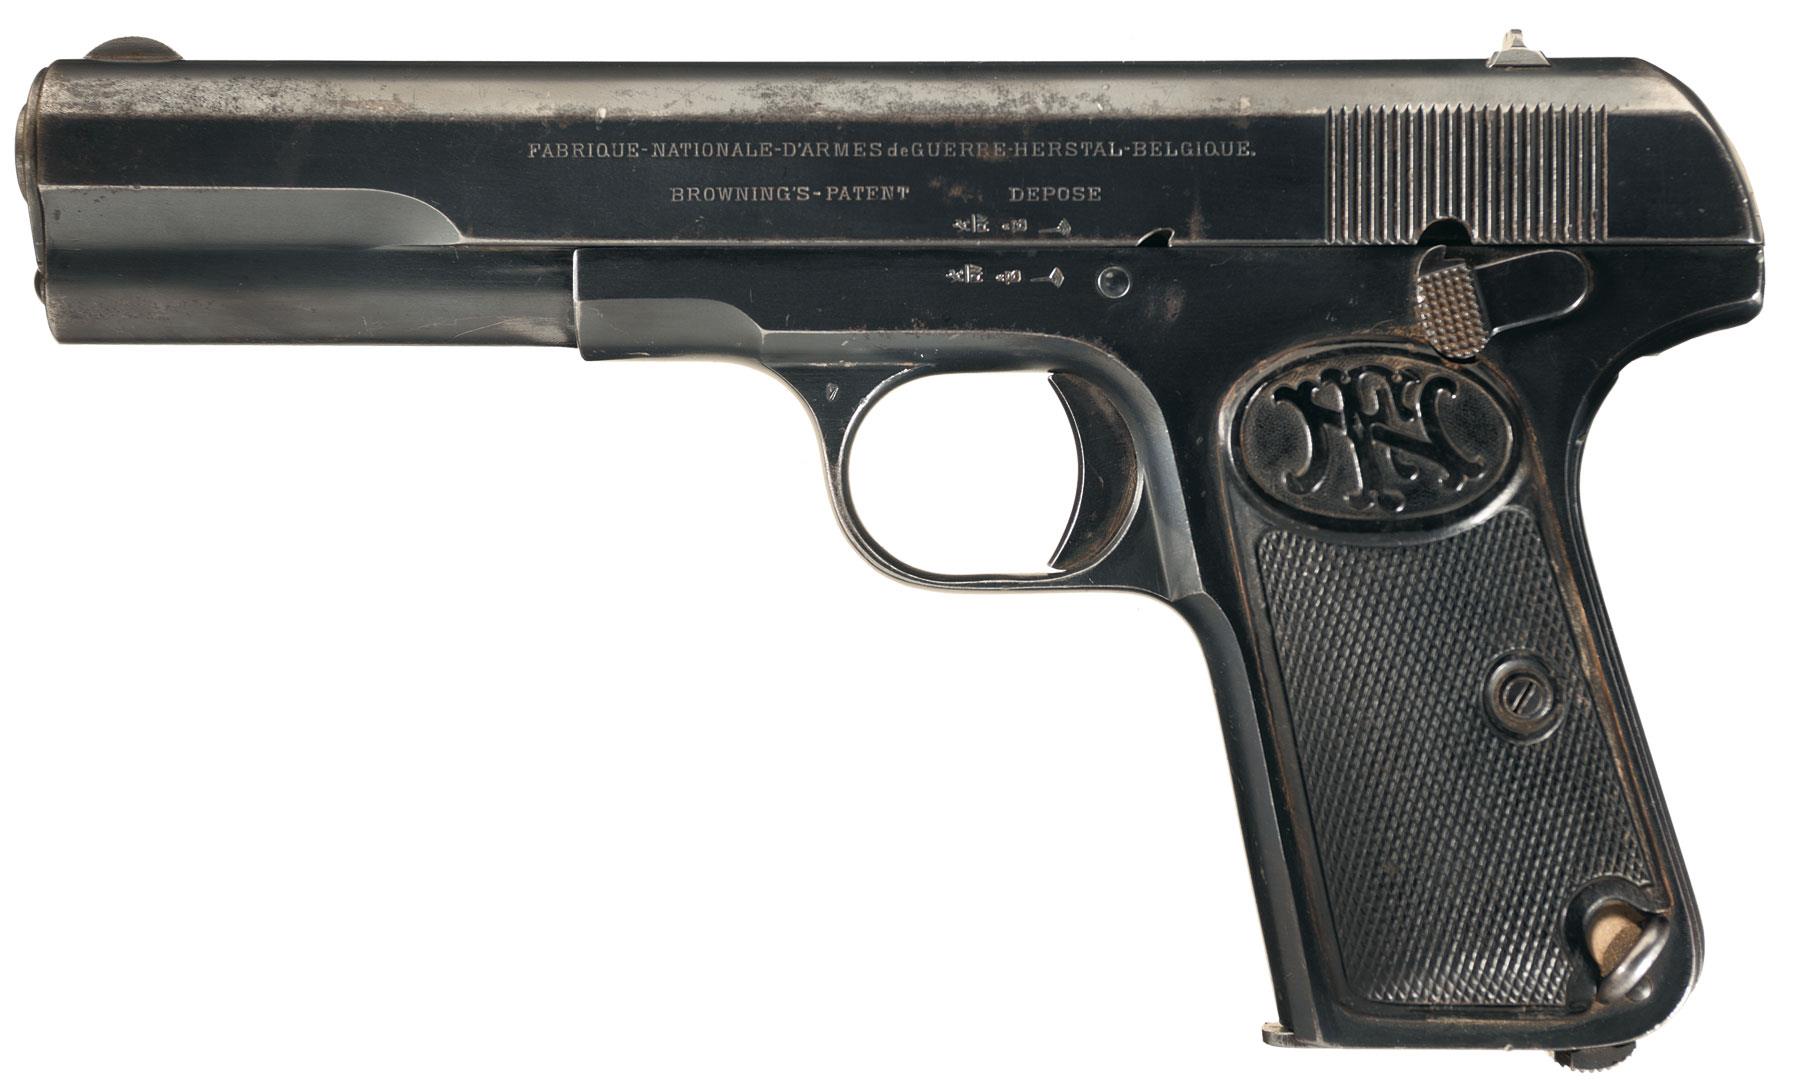 Fabrique Nationale 1903 Pistol 9 mm browning.